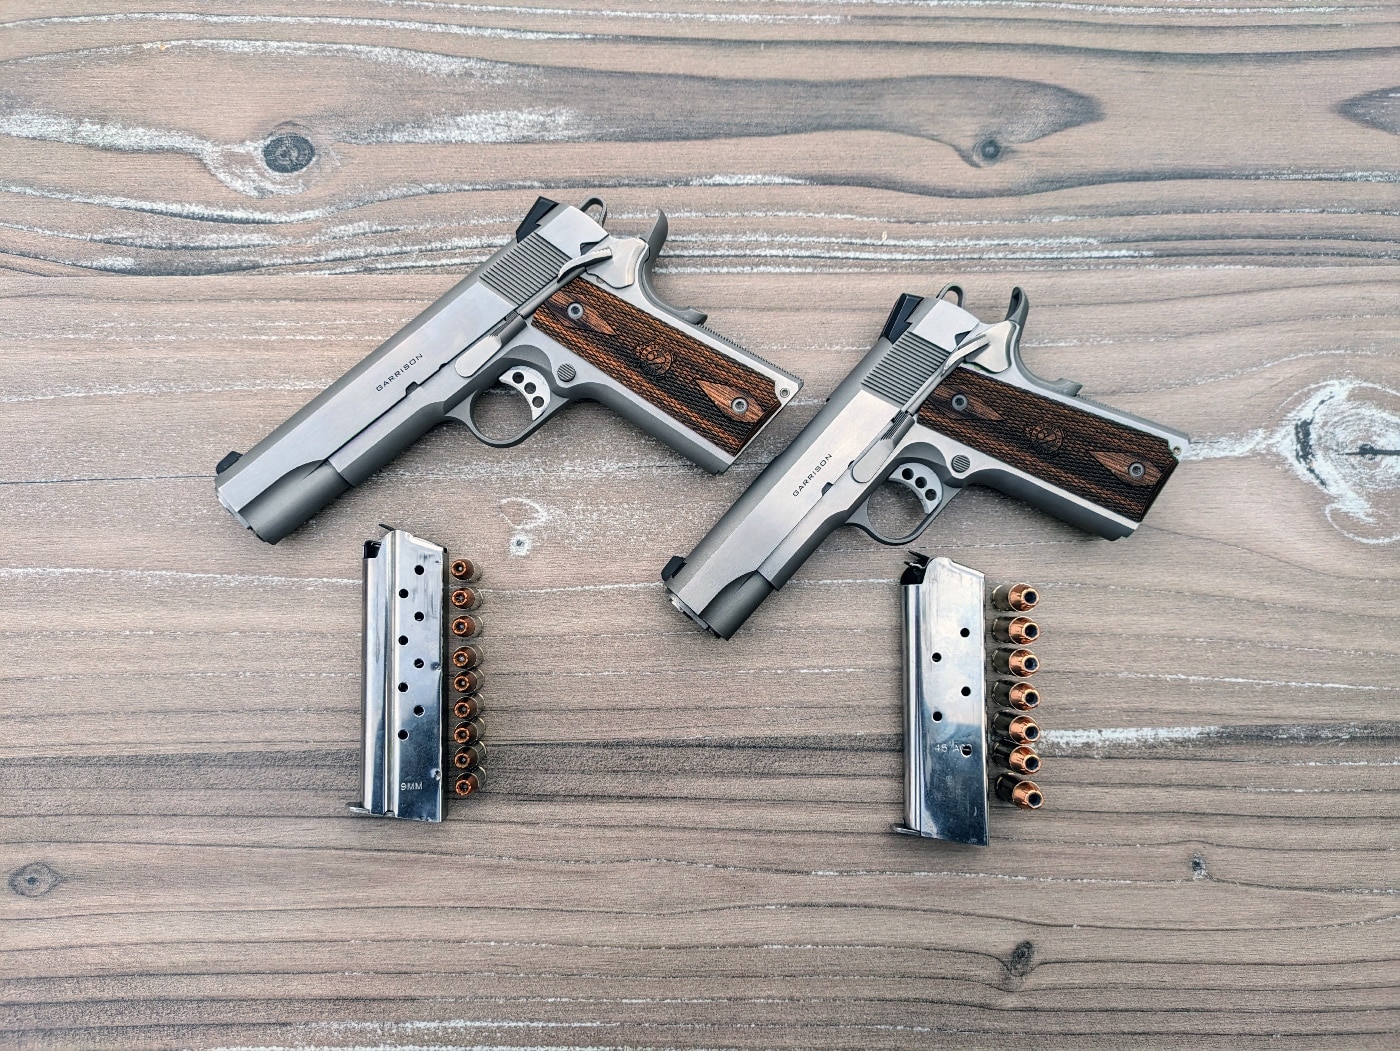 In this photograph, we see both of the Springfield Armory Garrison pistols evaluated in this article.